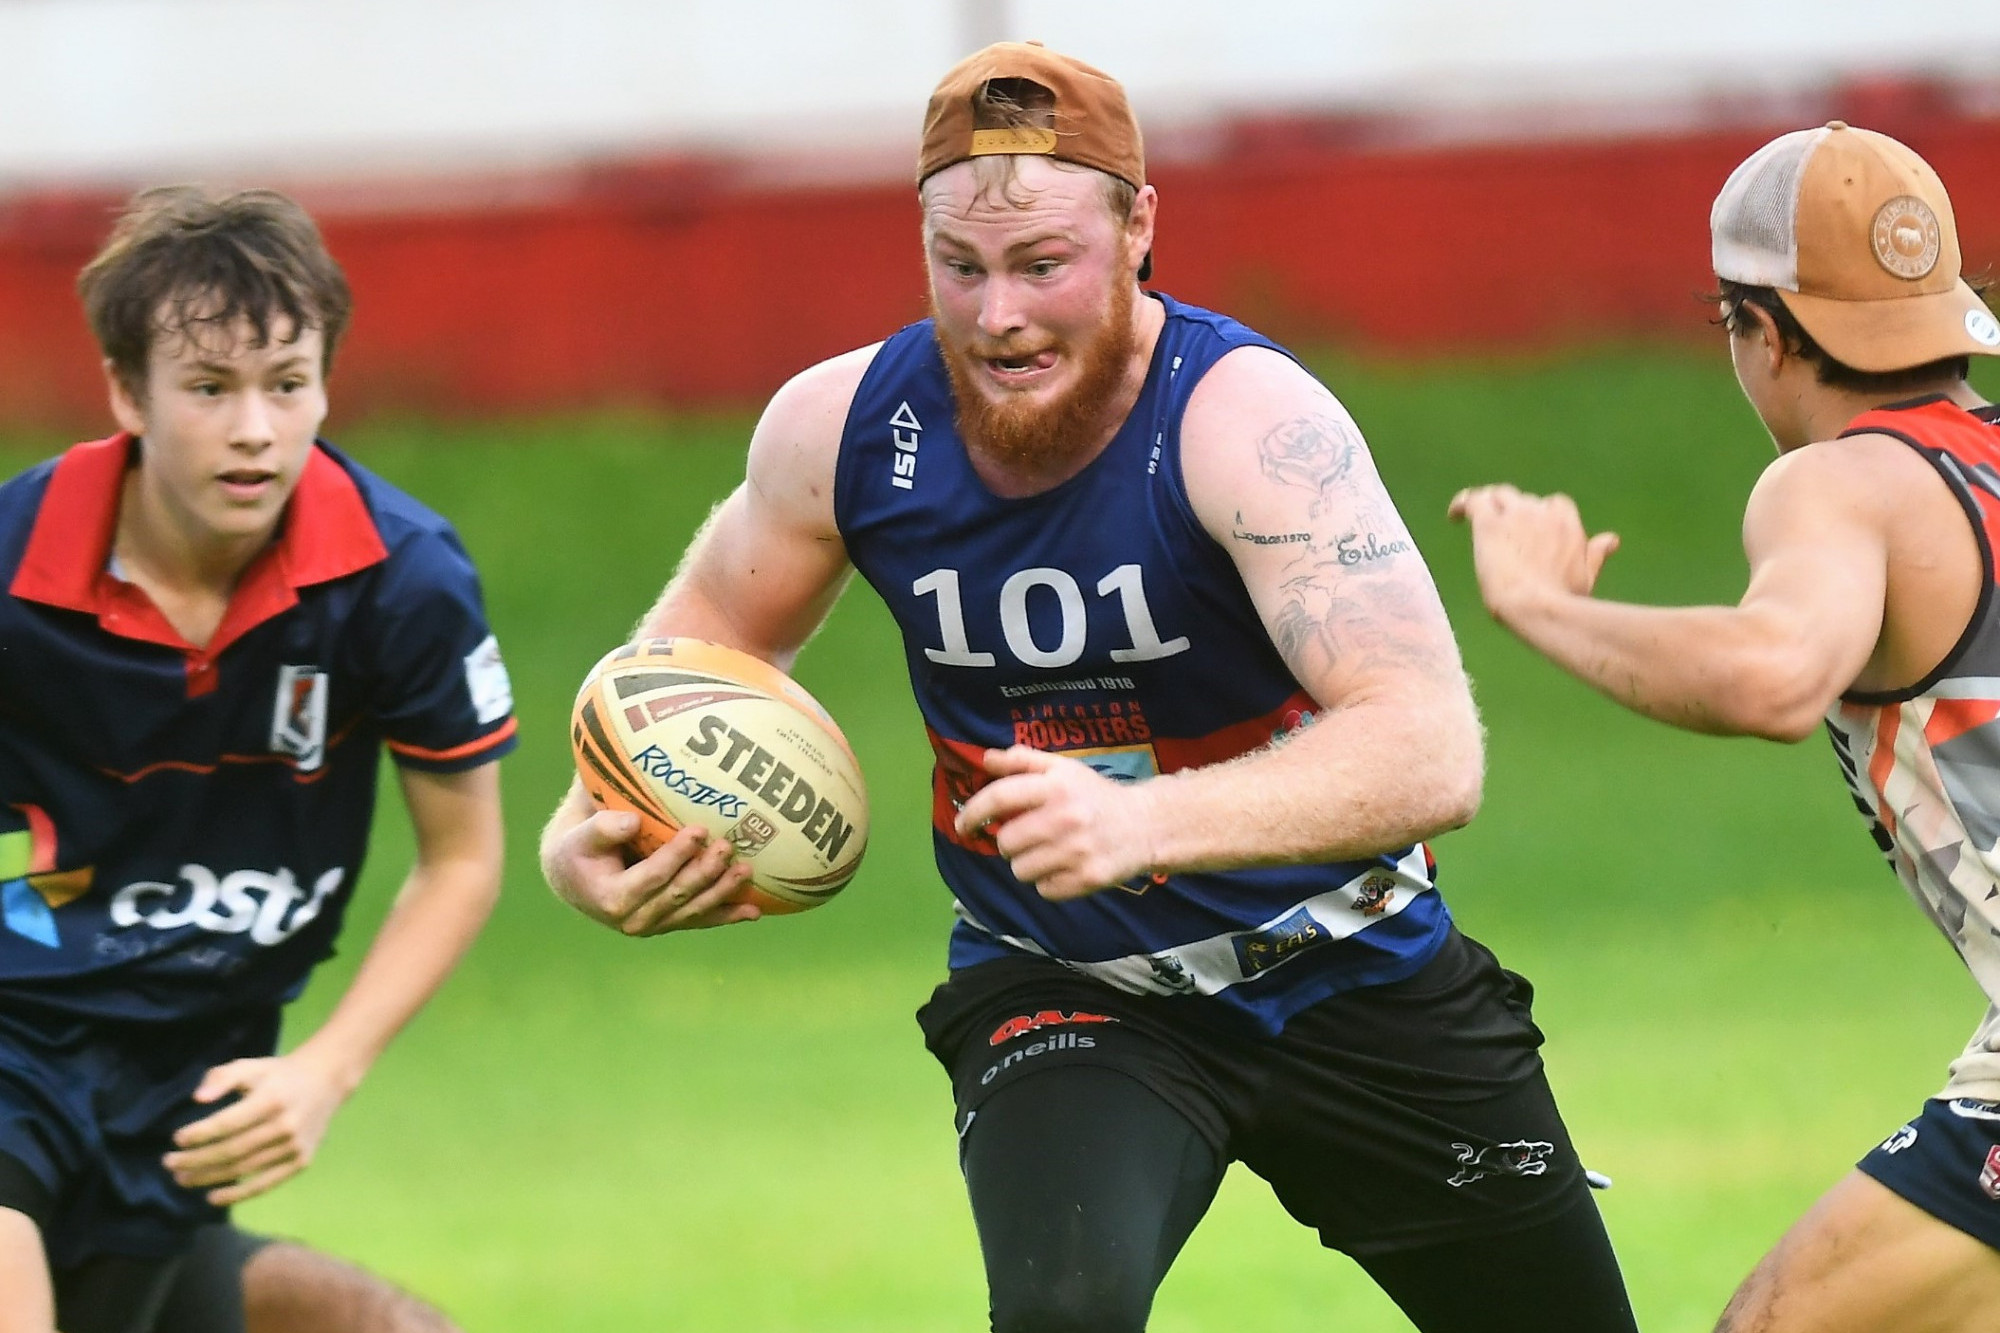 Player Matt Baillie is back for another season at the Atherton Roosters.